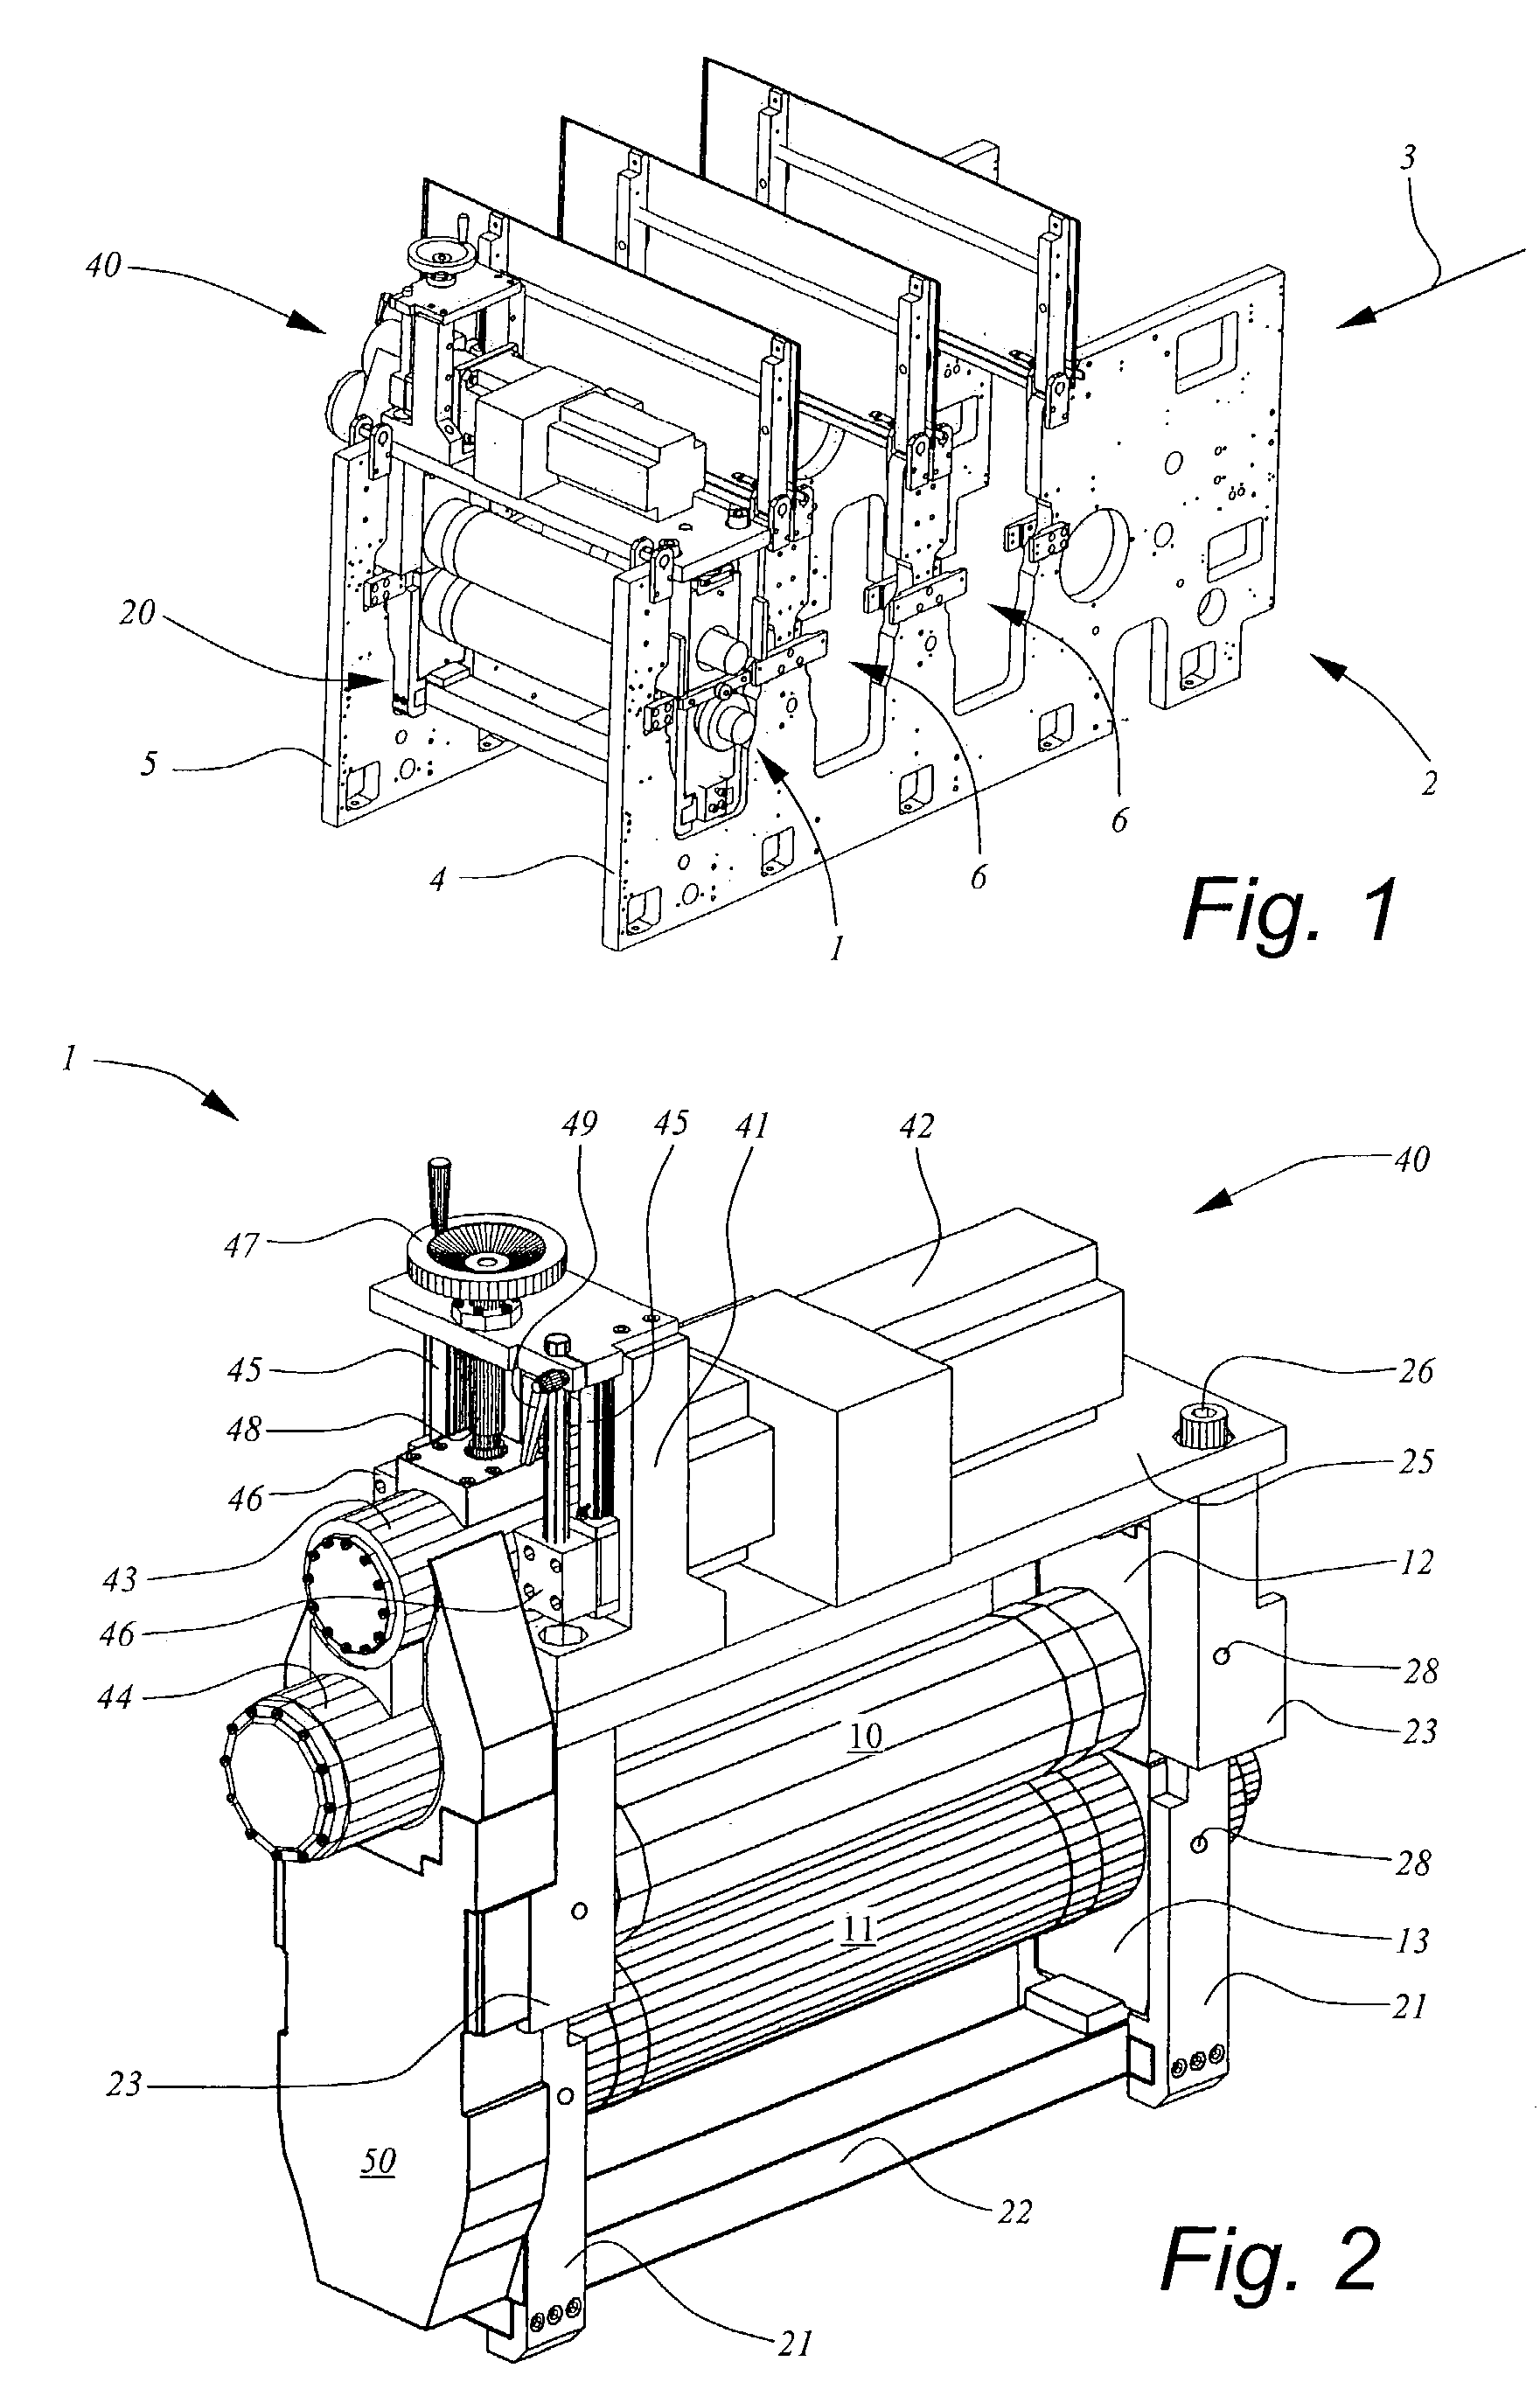 Device for rotary converting a web or sheet matter